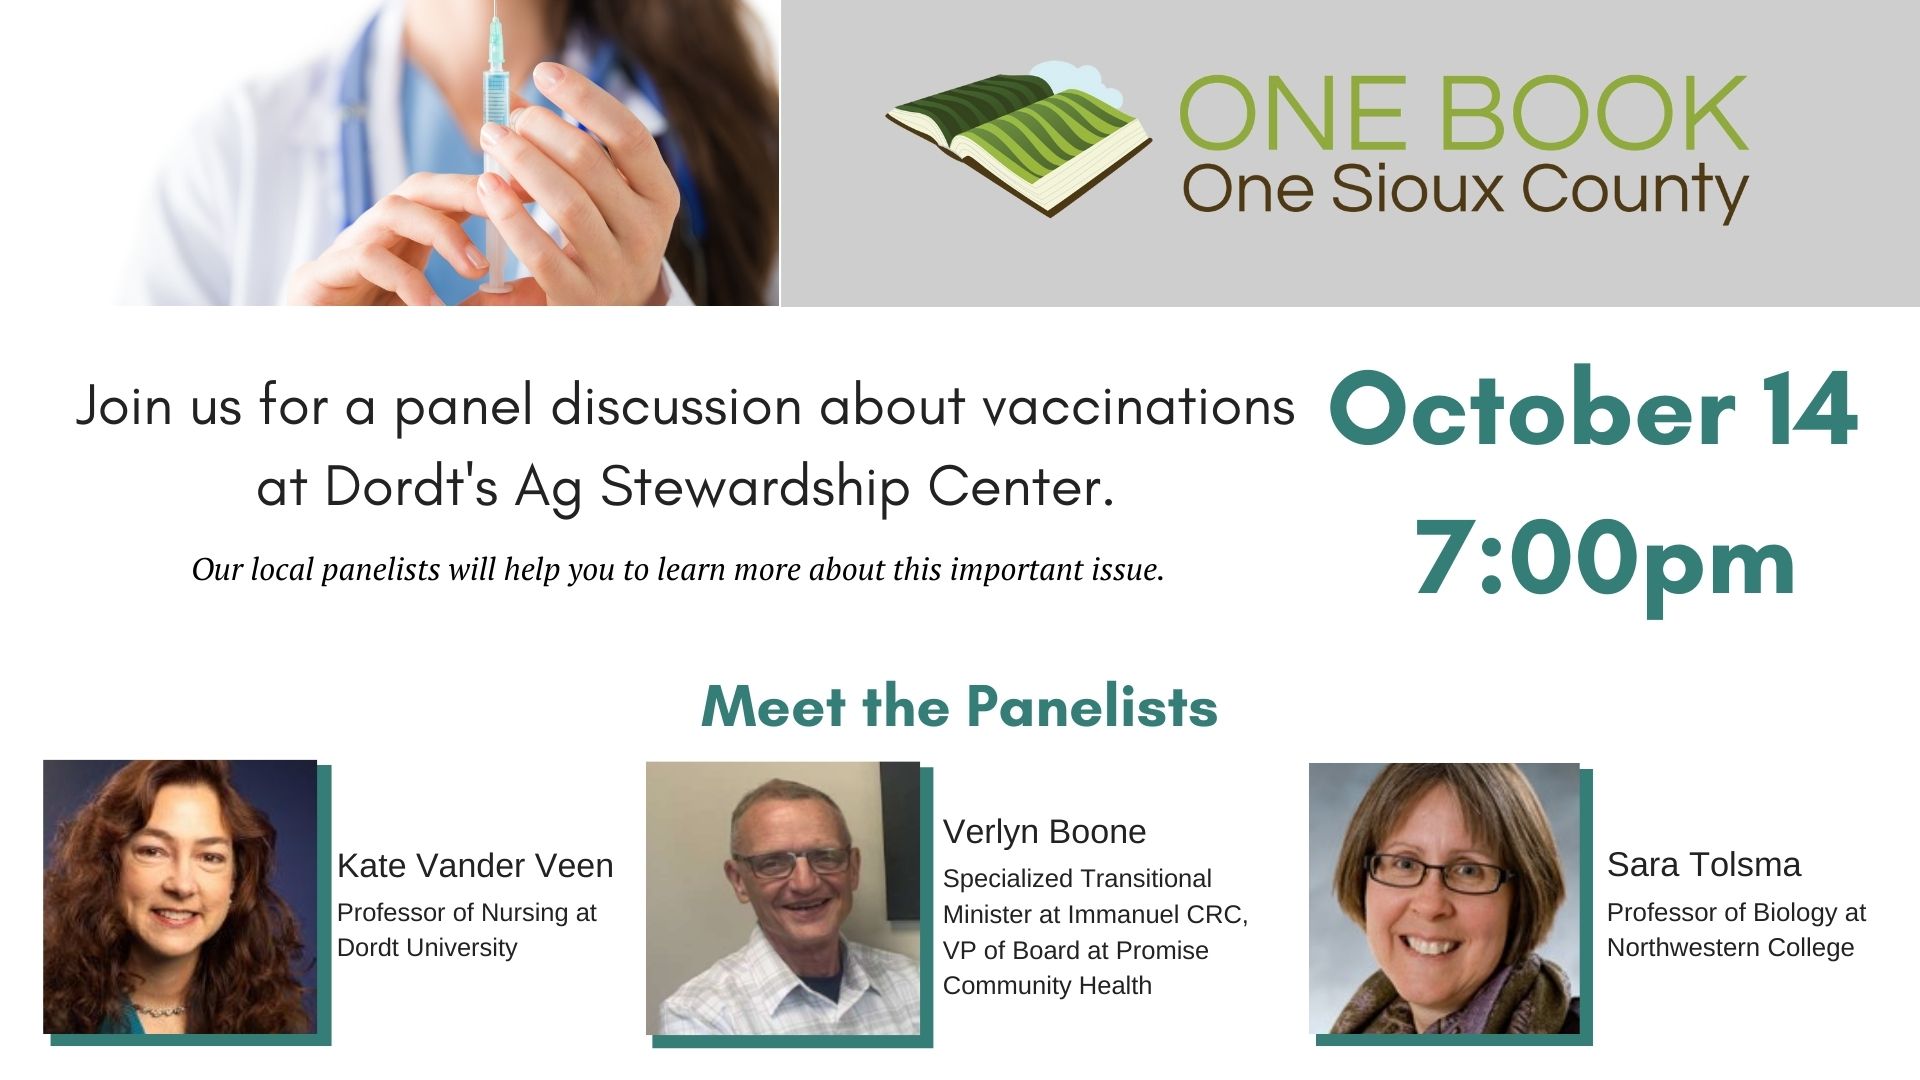 OBOSC - panel discussion on vaccines